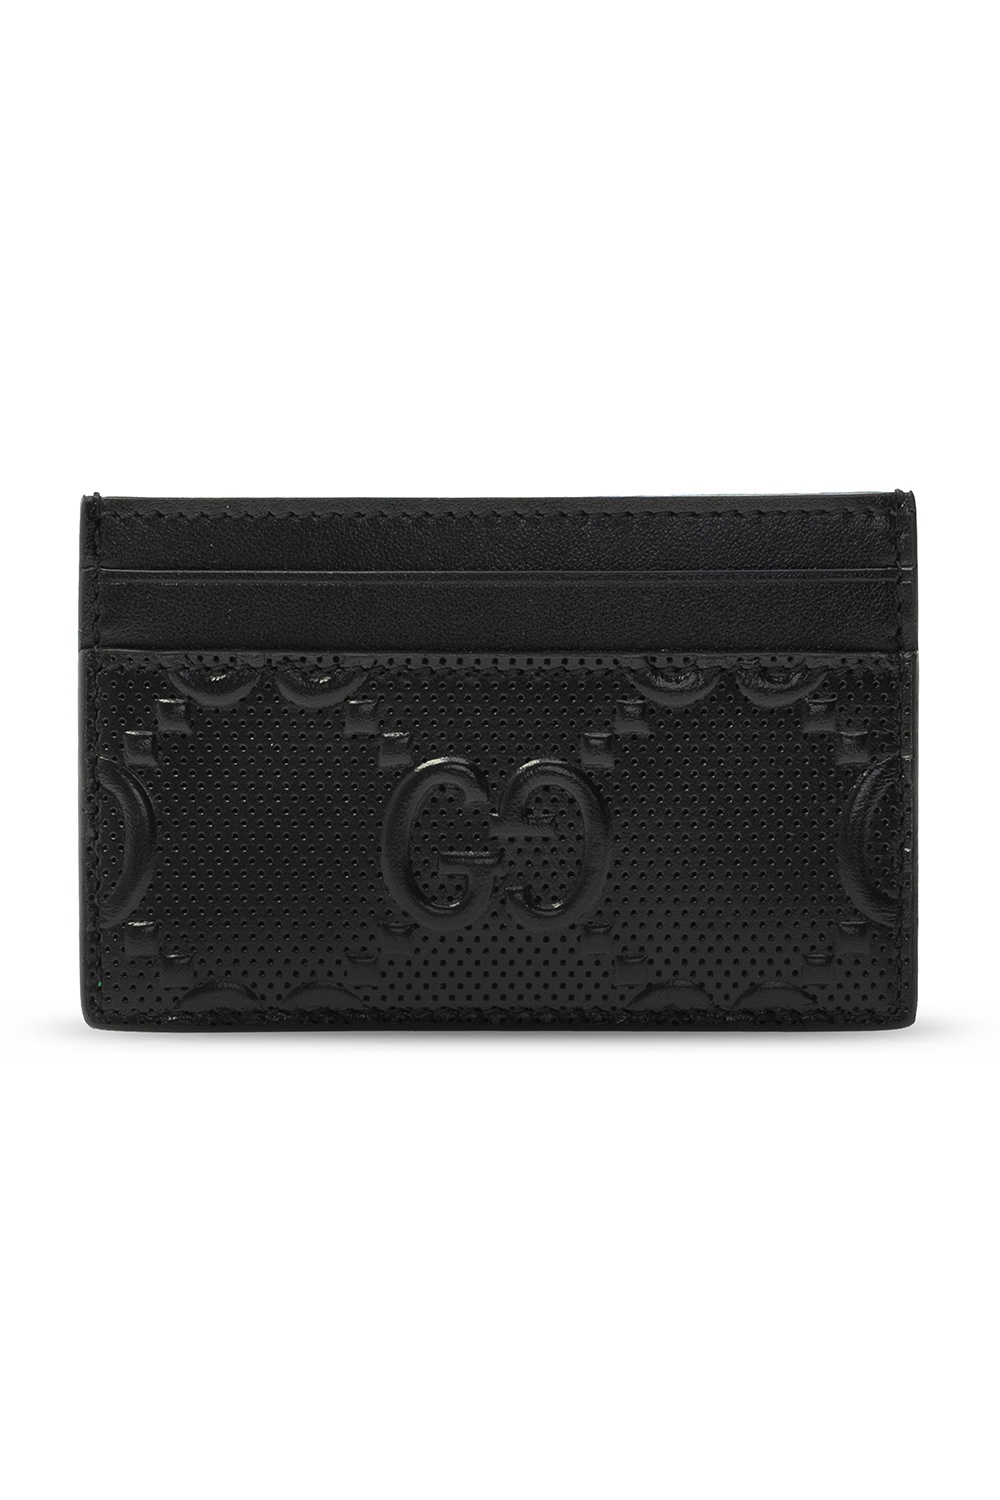 gucci embossed leather cardholder